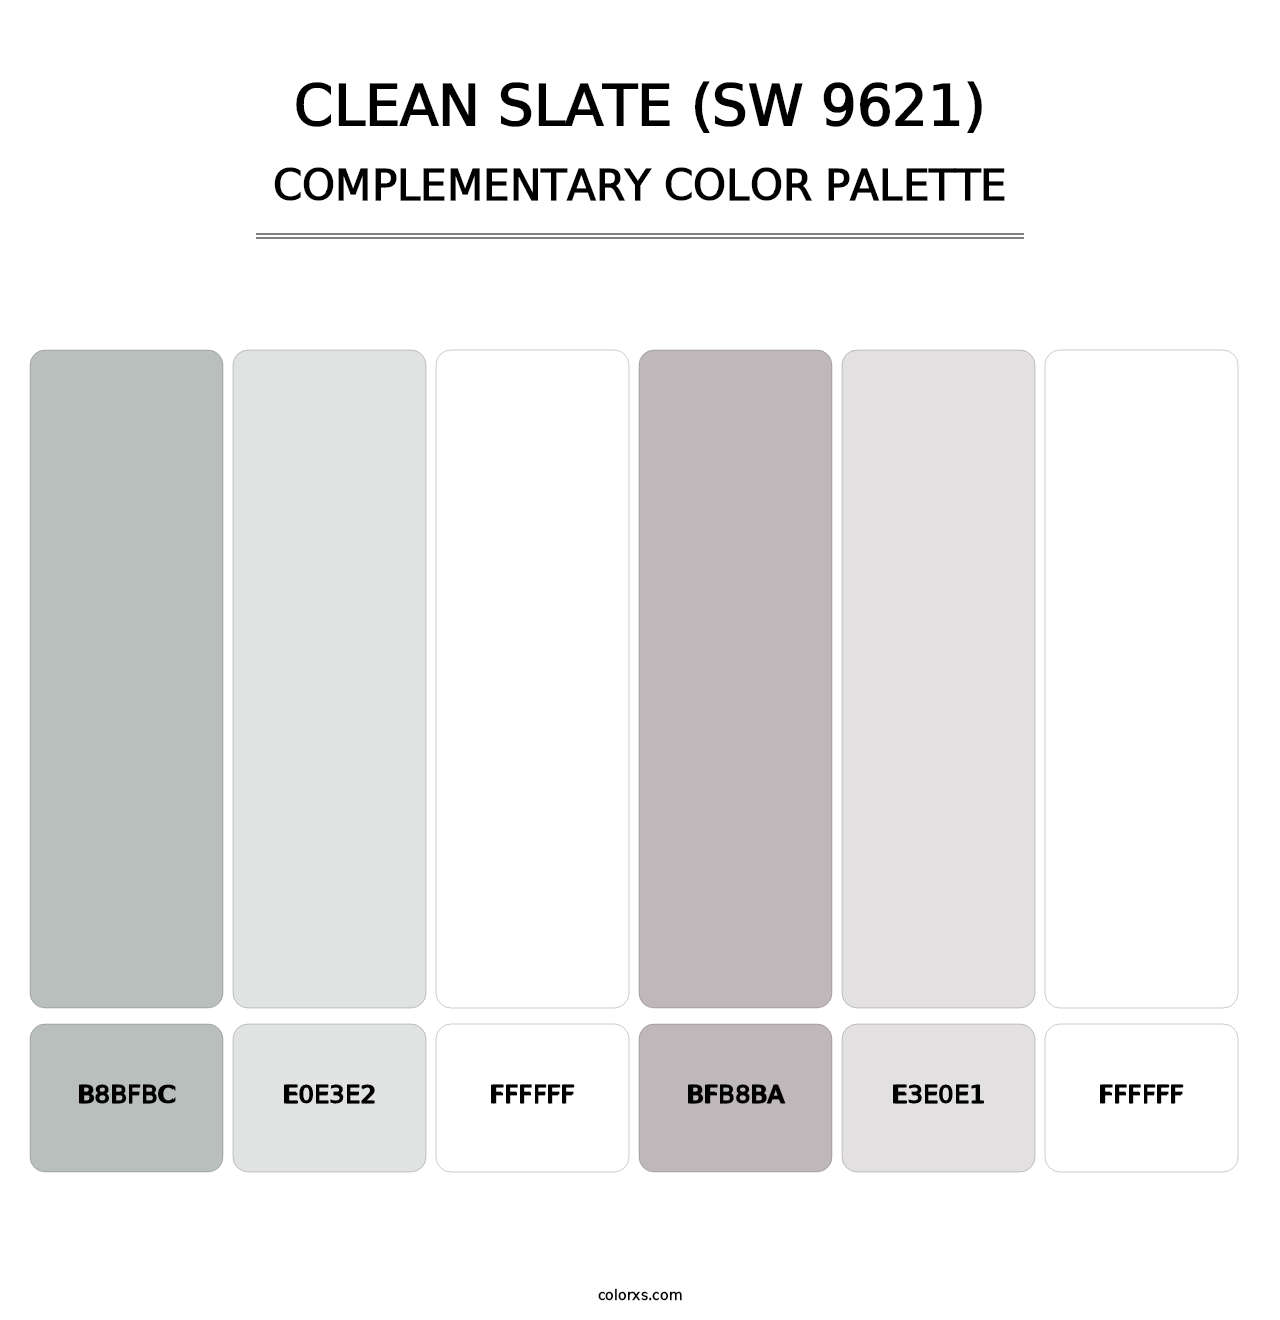 Clean Slate (SW 9621) - Complementary Color Palette